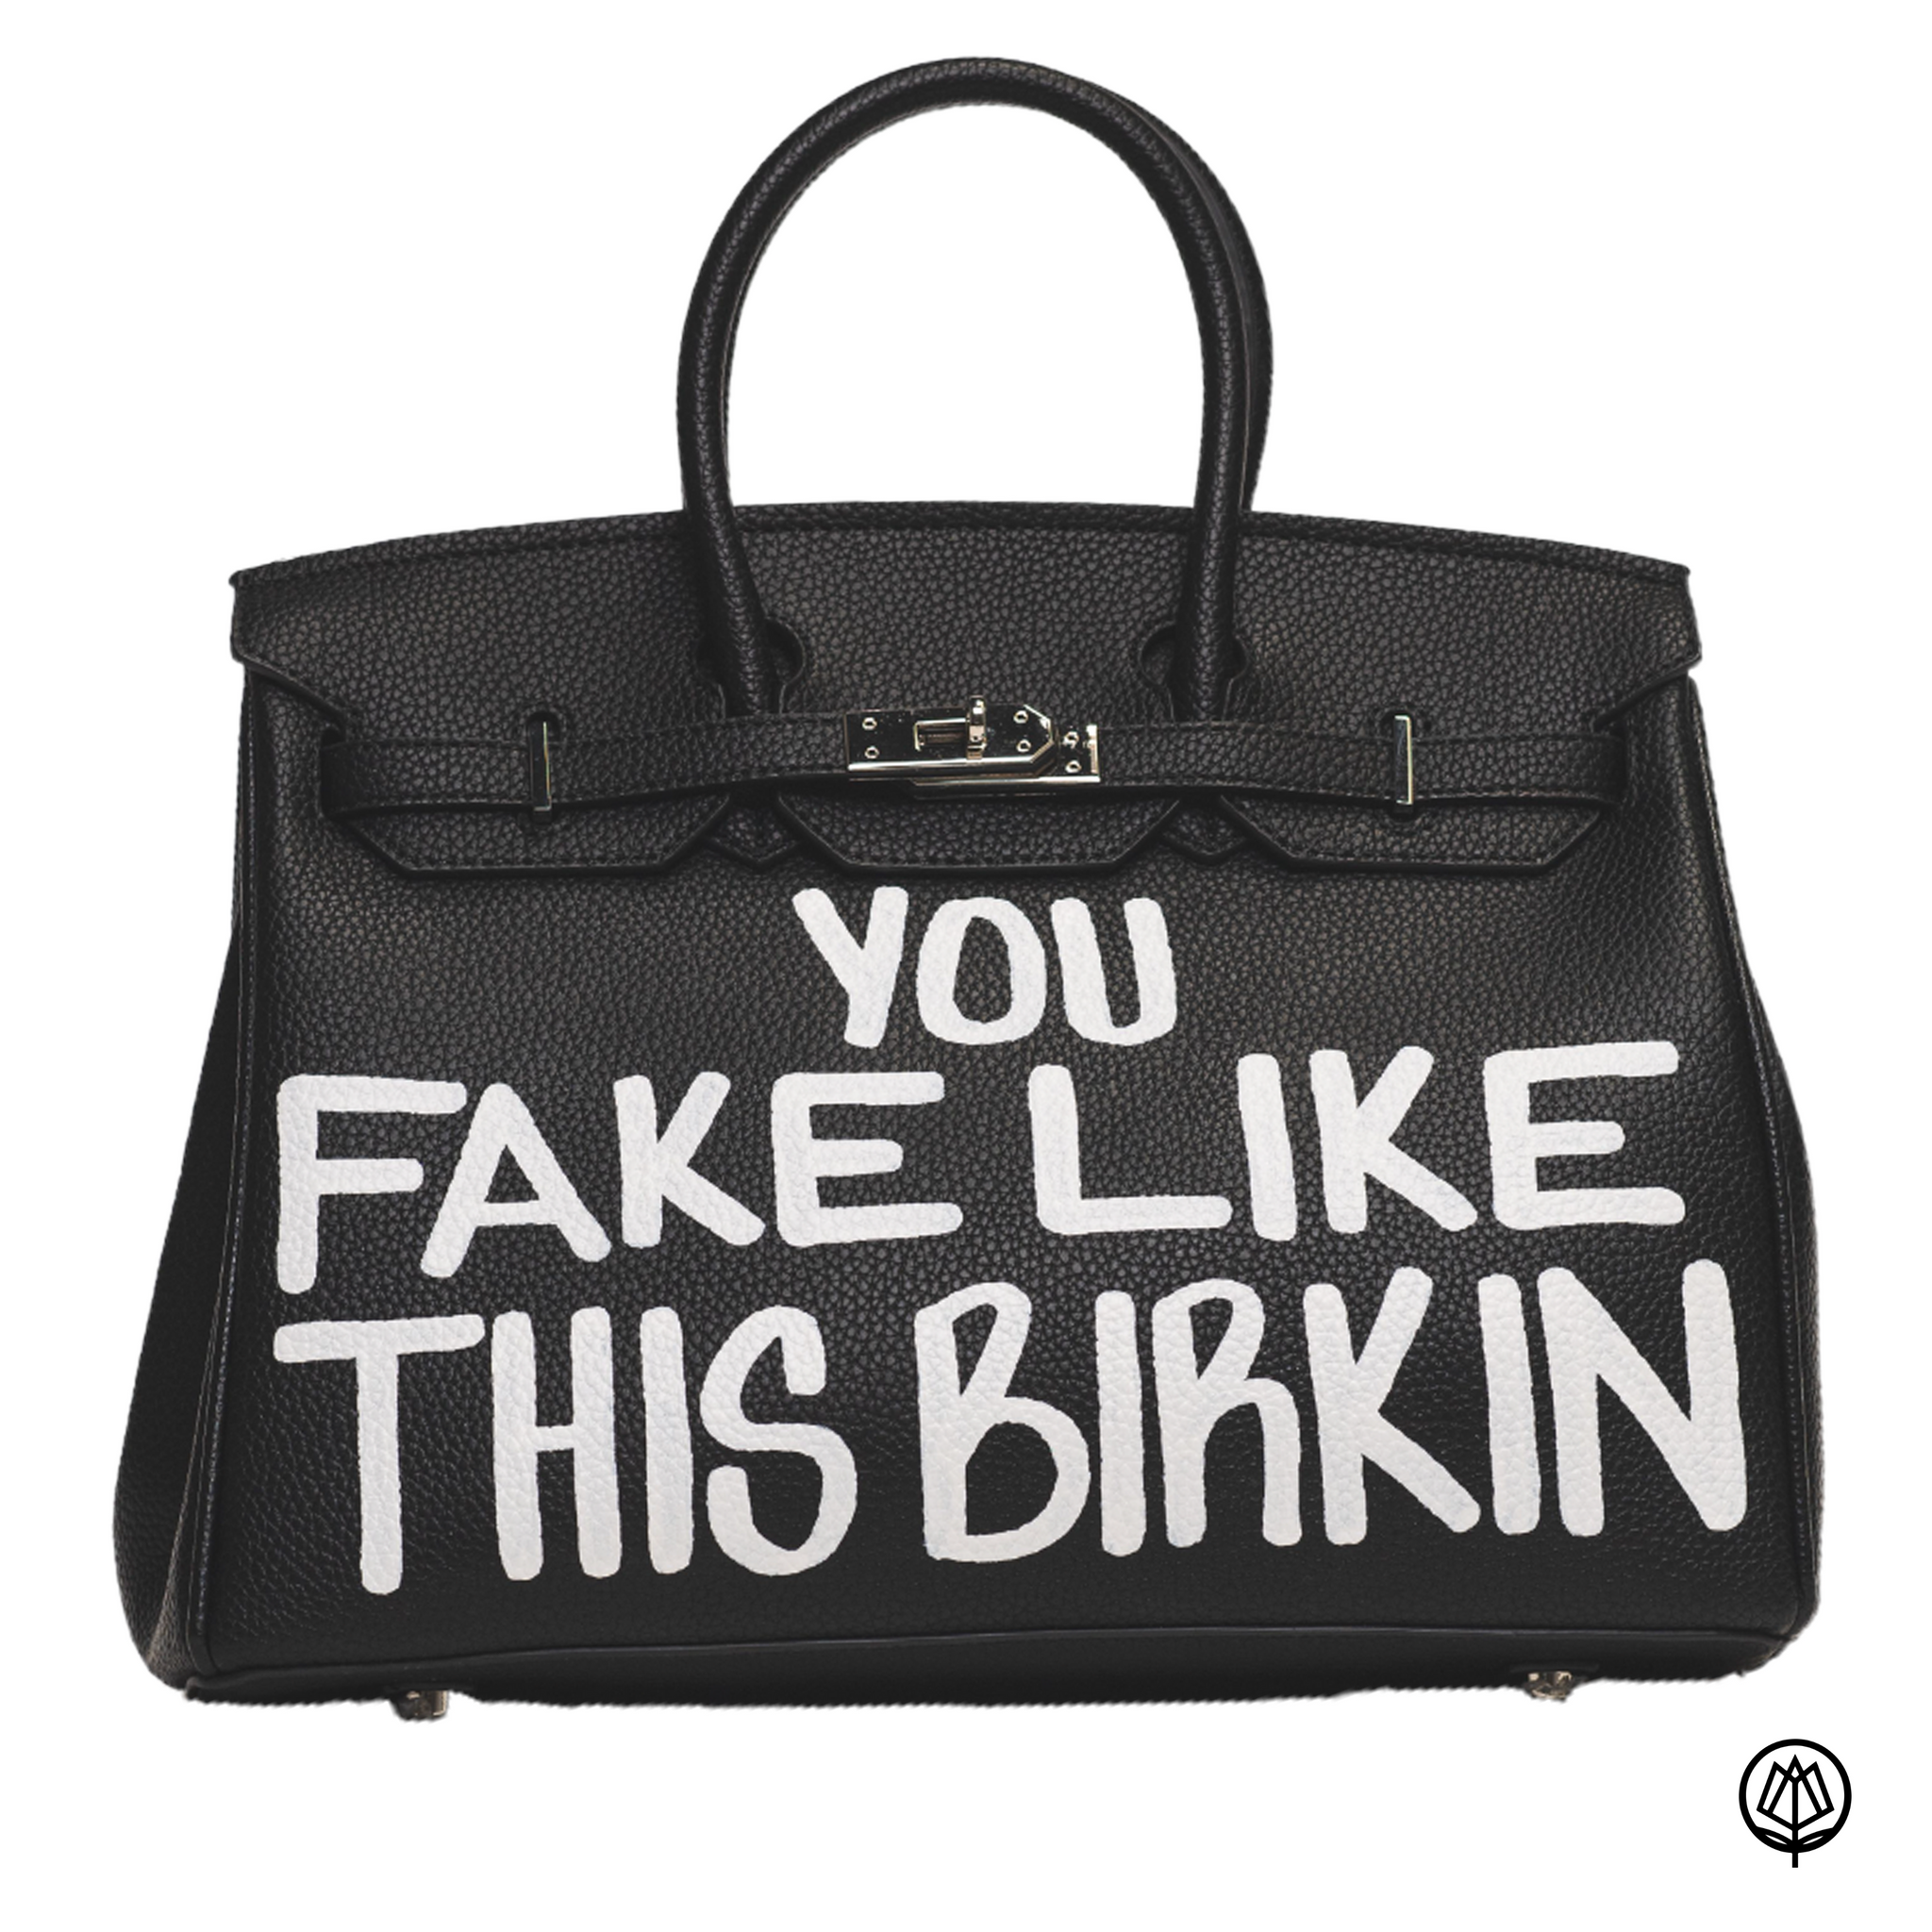 My 1st You Fake Like This Birkin Bag Review